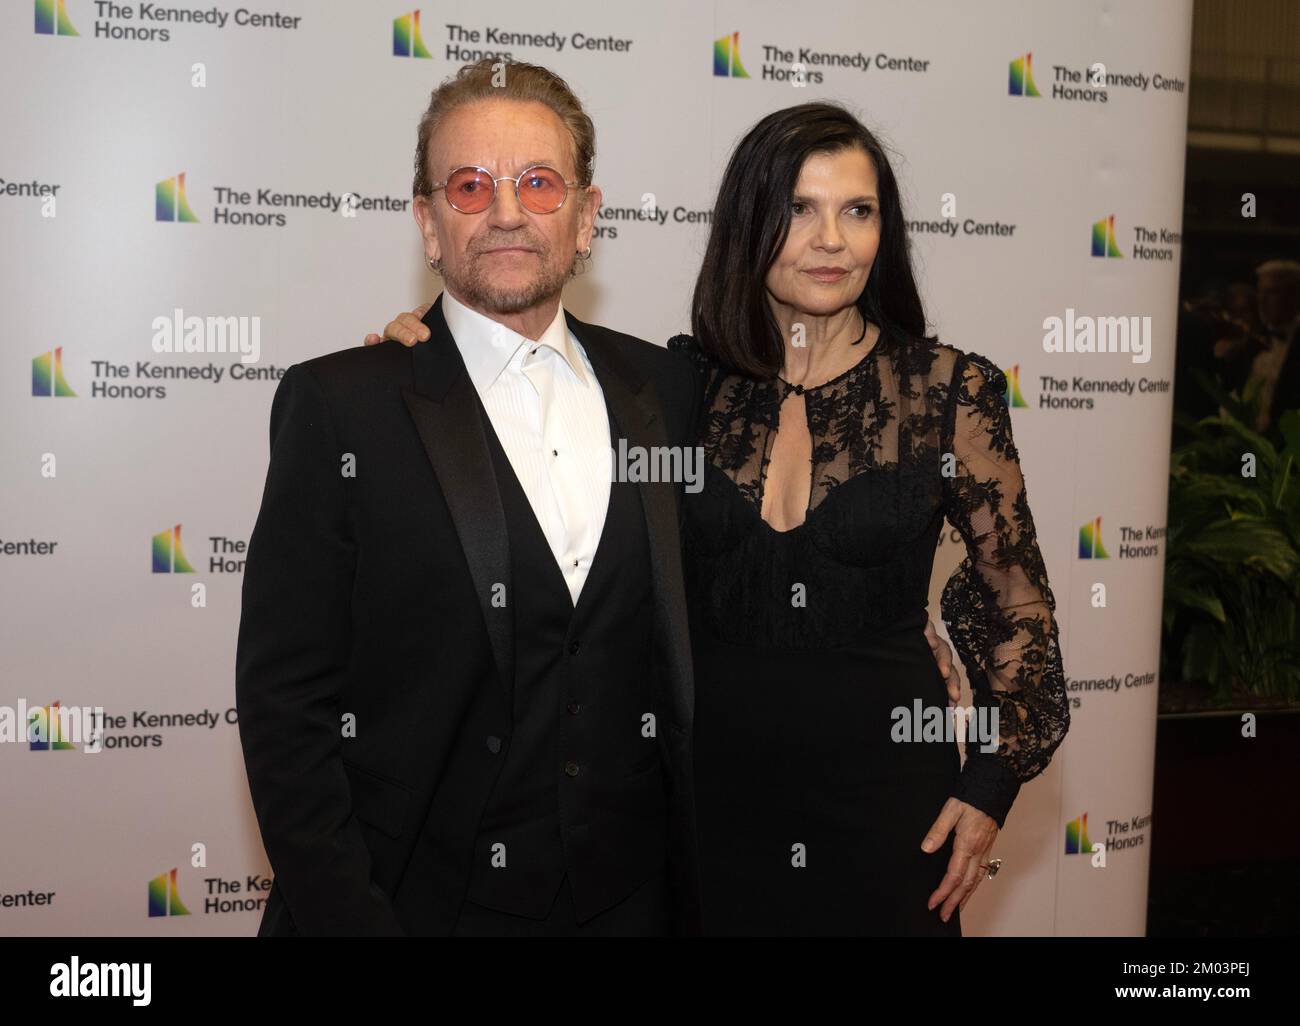 Bono and his wife, Ali Hewson, arrive for the formal Artist's Dinner honoring the recipients of the 45th Annual Kennedy Center Honors at the Department of State in Washington, DC on Saturday, December 3, 2022. The 2022 honorees are: actor and filmmaker George Clooney; contemporary Christian and pop singer-songwriter Amy Grant; legendary singer of soul, Gospel, R&B, and pop Gladys Knight; Cuban-born American composer, conductor, and educator Tania León; and iconic Irish rock band U2, comprised of band members Bono, The Edge, Adam Clayton, and Larry Mullen Jr. Credit: Ron Sachs/Pool/Sipa USA Stock Photo